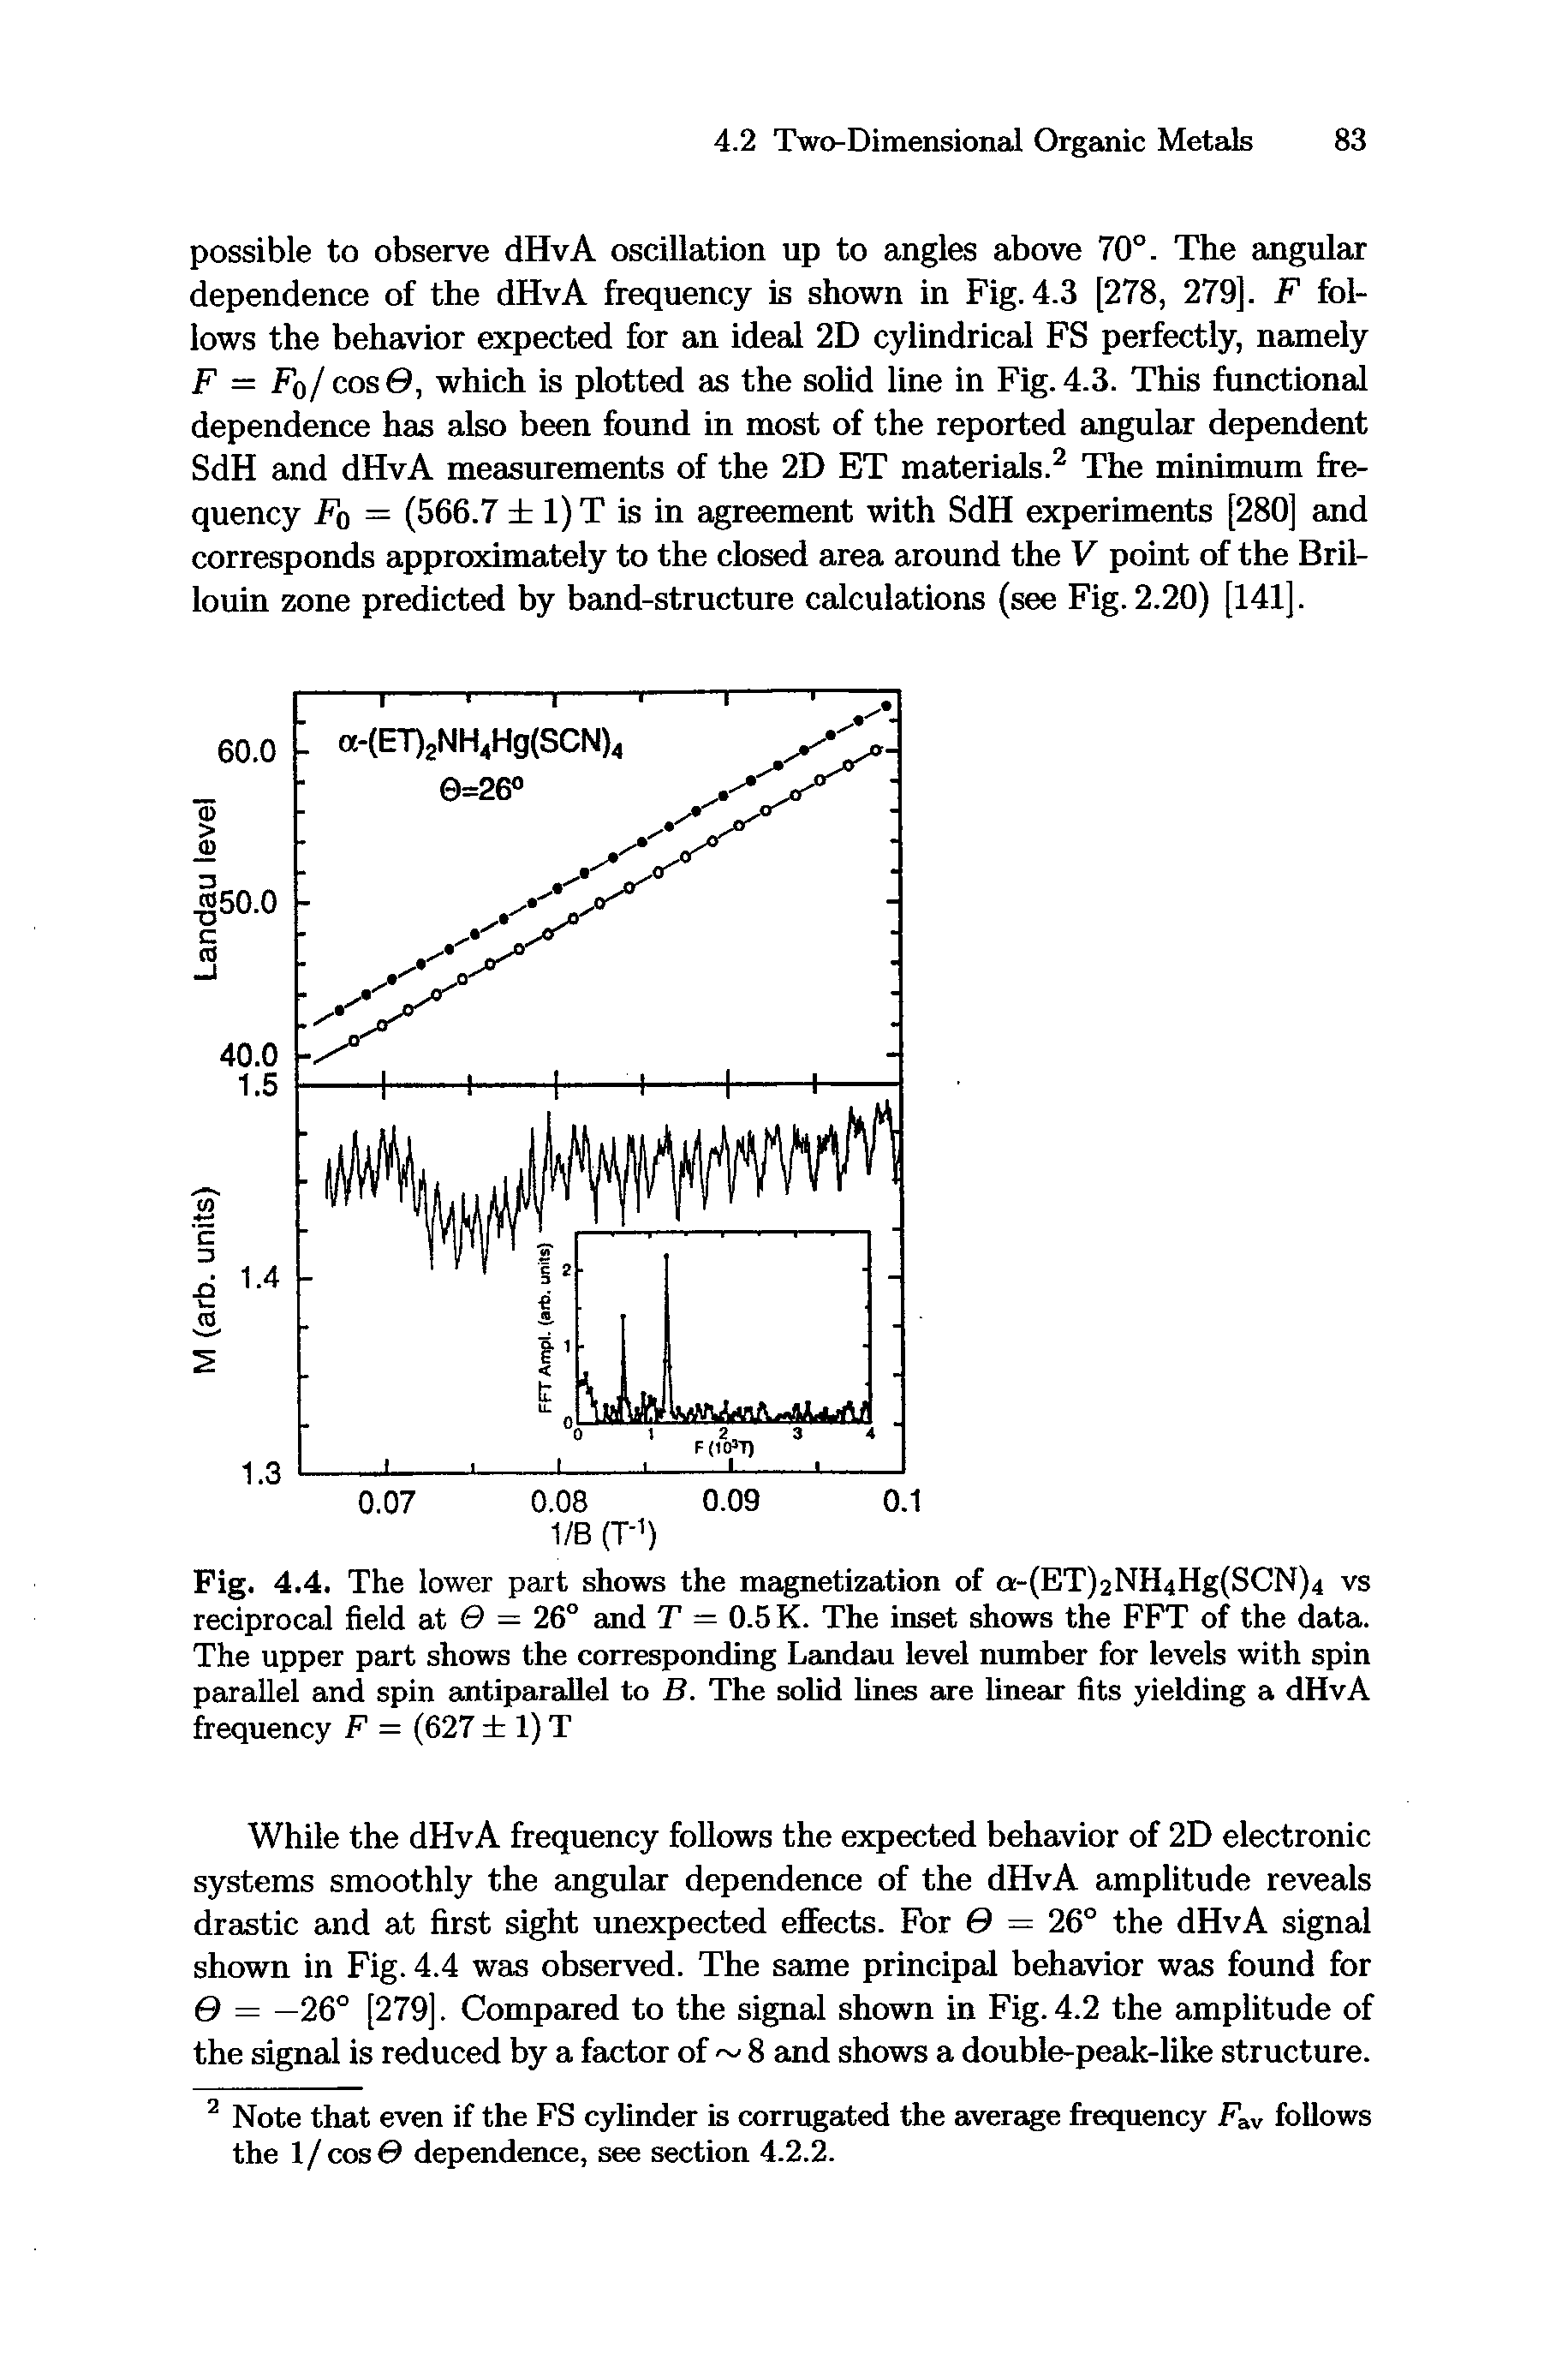 Fig. 4.4. The lower part shows the magnetization of a-(ET)2NH4Hg(SCN)4 vs reciprocal field at 0 = 26° and T = 0.5 K. The inset shows the FFT of the data. The upper part shows the corresponding Landau level number for levels with spin parallel and spin antiparallel to B. The solid fines are linear fits yielding a dHvA frequency F = (627 1) T...